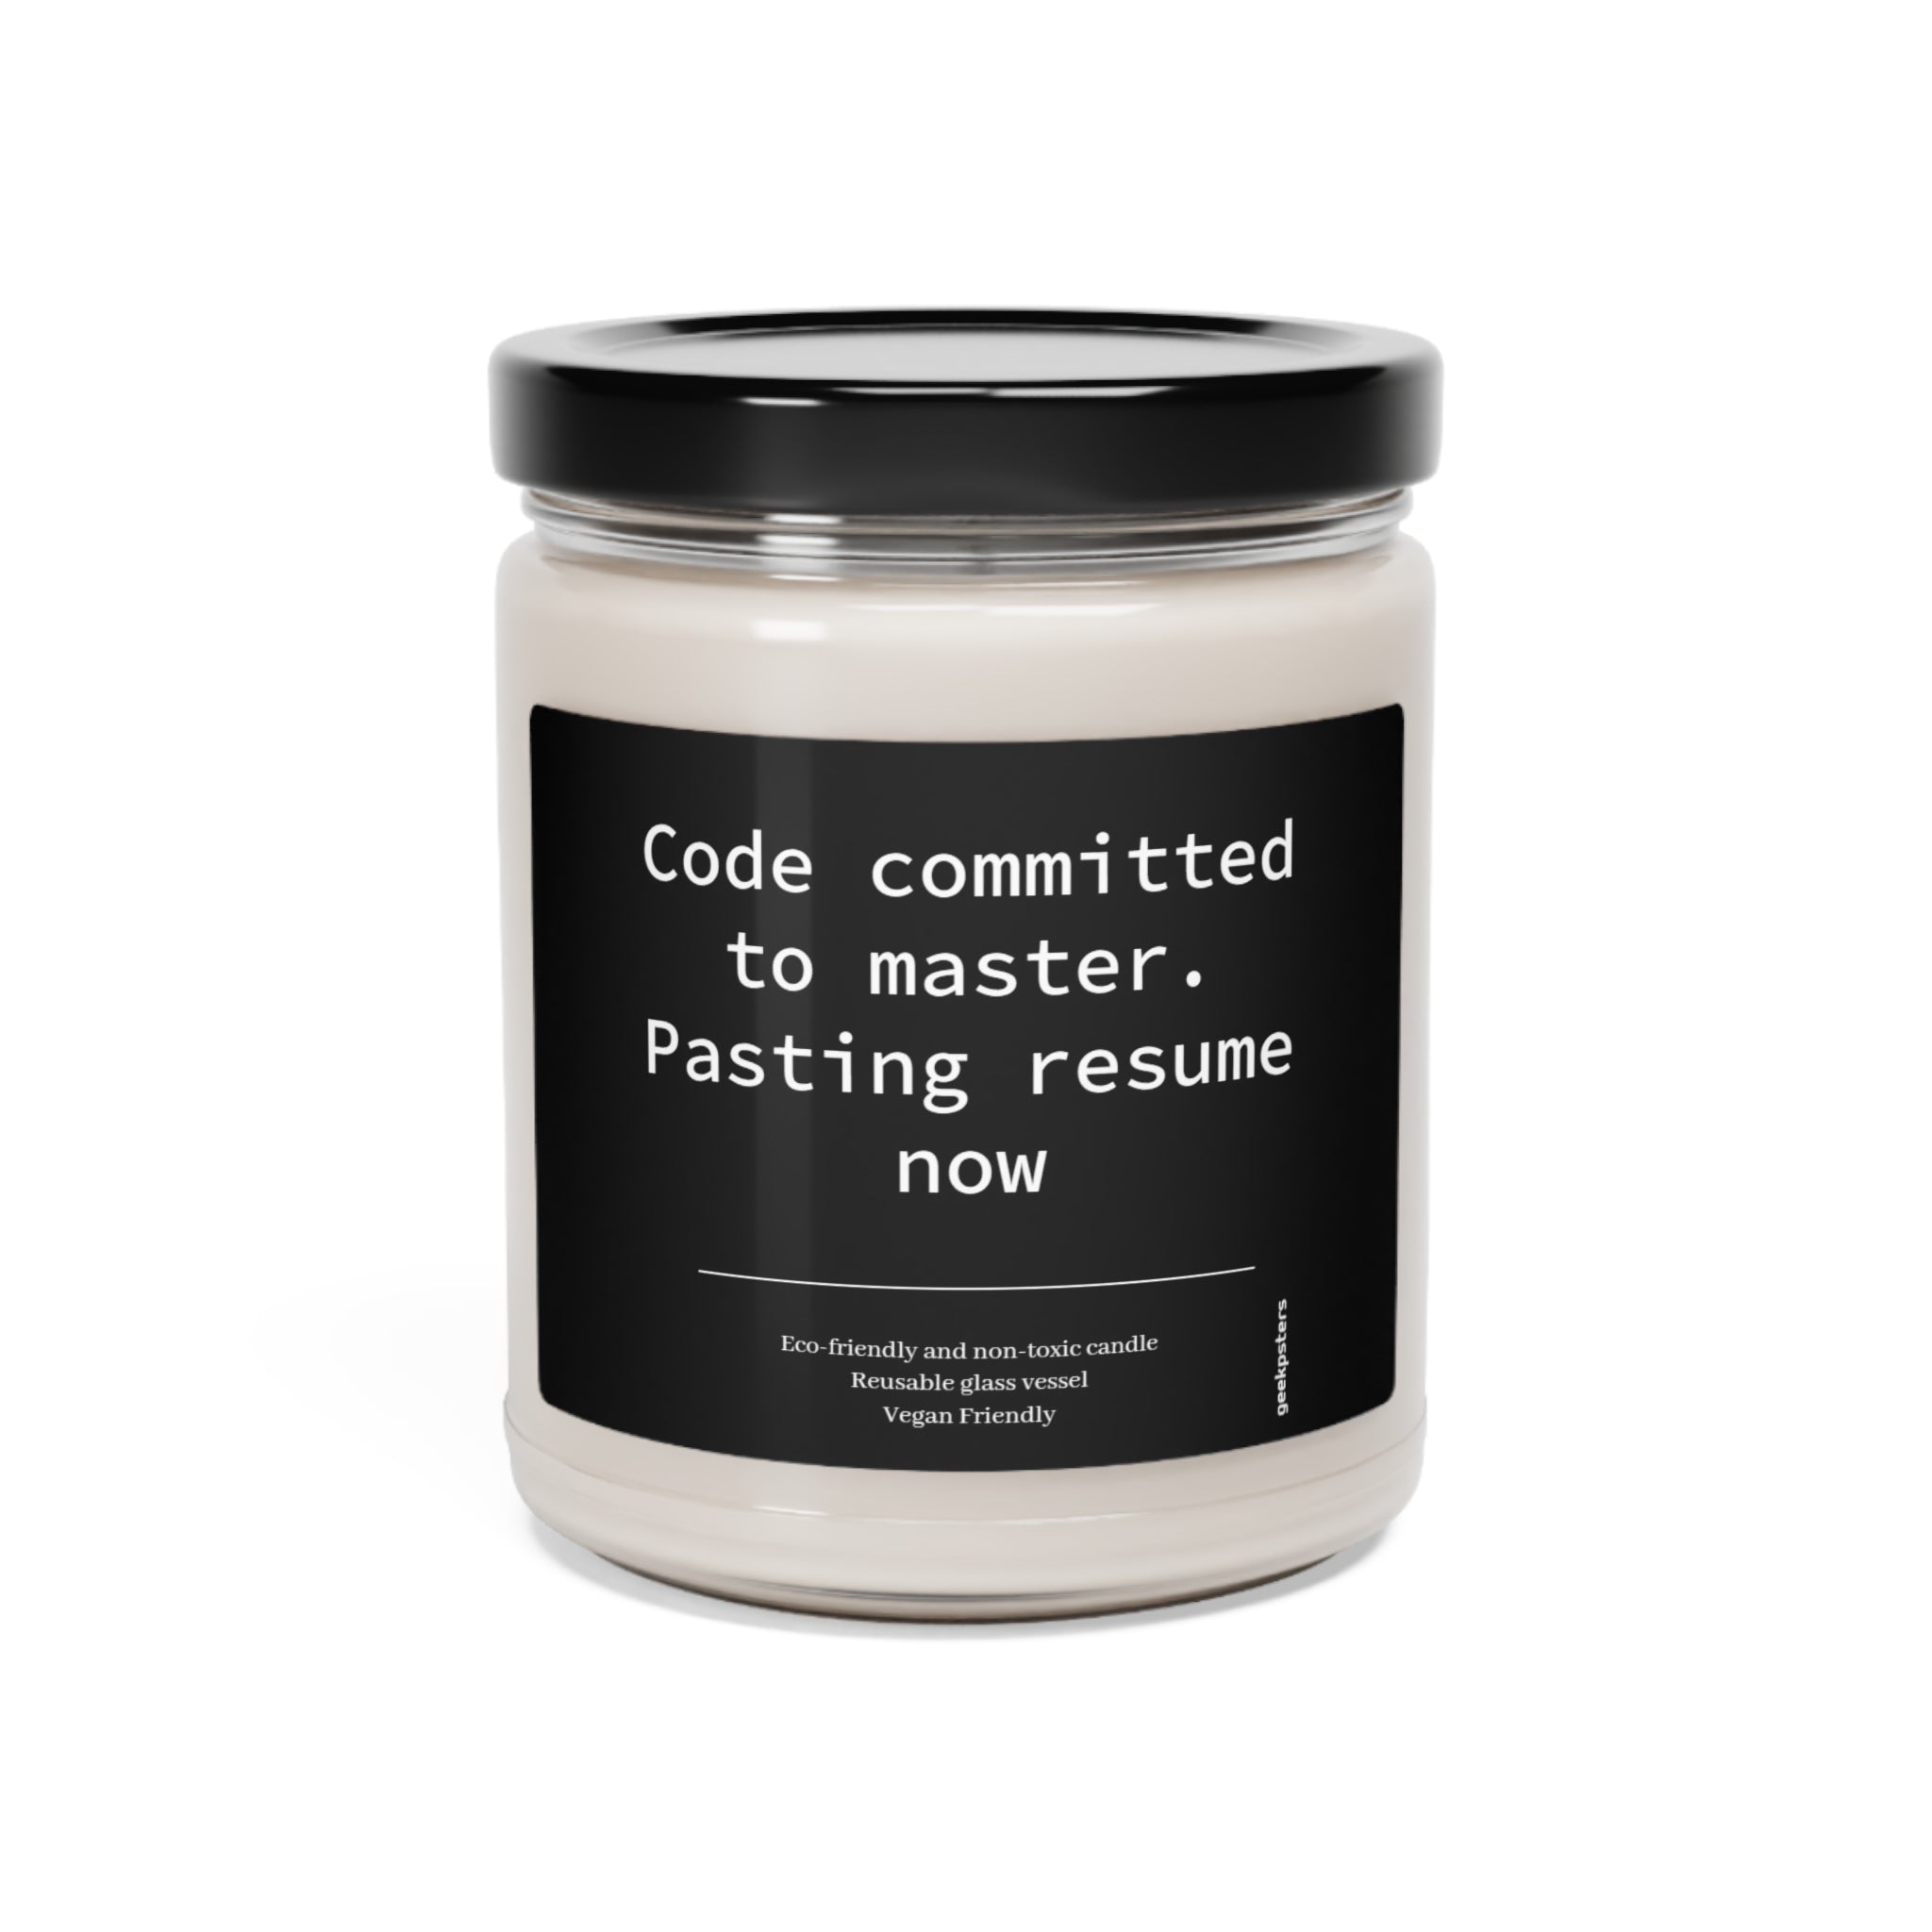 A Code Committed to Master. Pasting Resume Now scented soy candle with a humorous label that says "code committed to master. pasting resume now" indicating a programmer's joke about making a risky code commit.